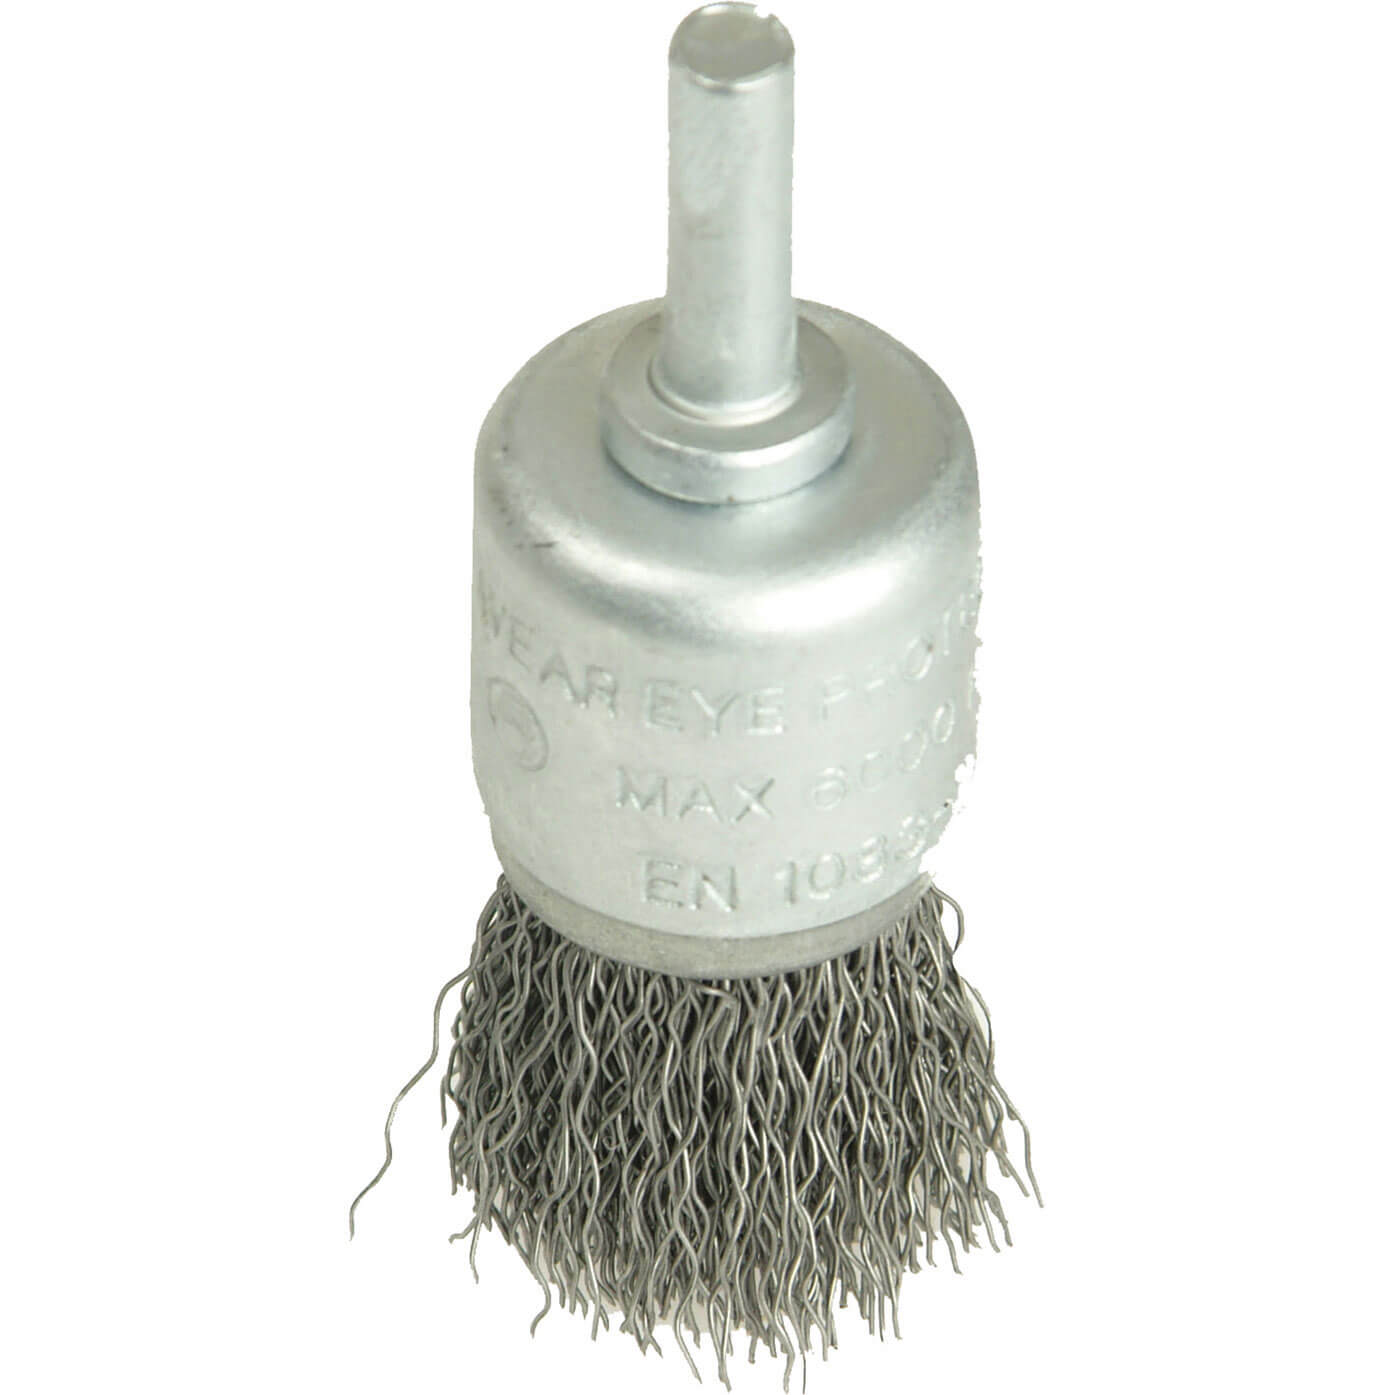 Photo of Black And Decker X36025 Piranha Crimped Steel Wire Cup Brush 25mm 6mm Shank